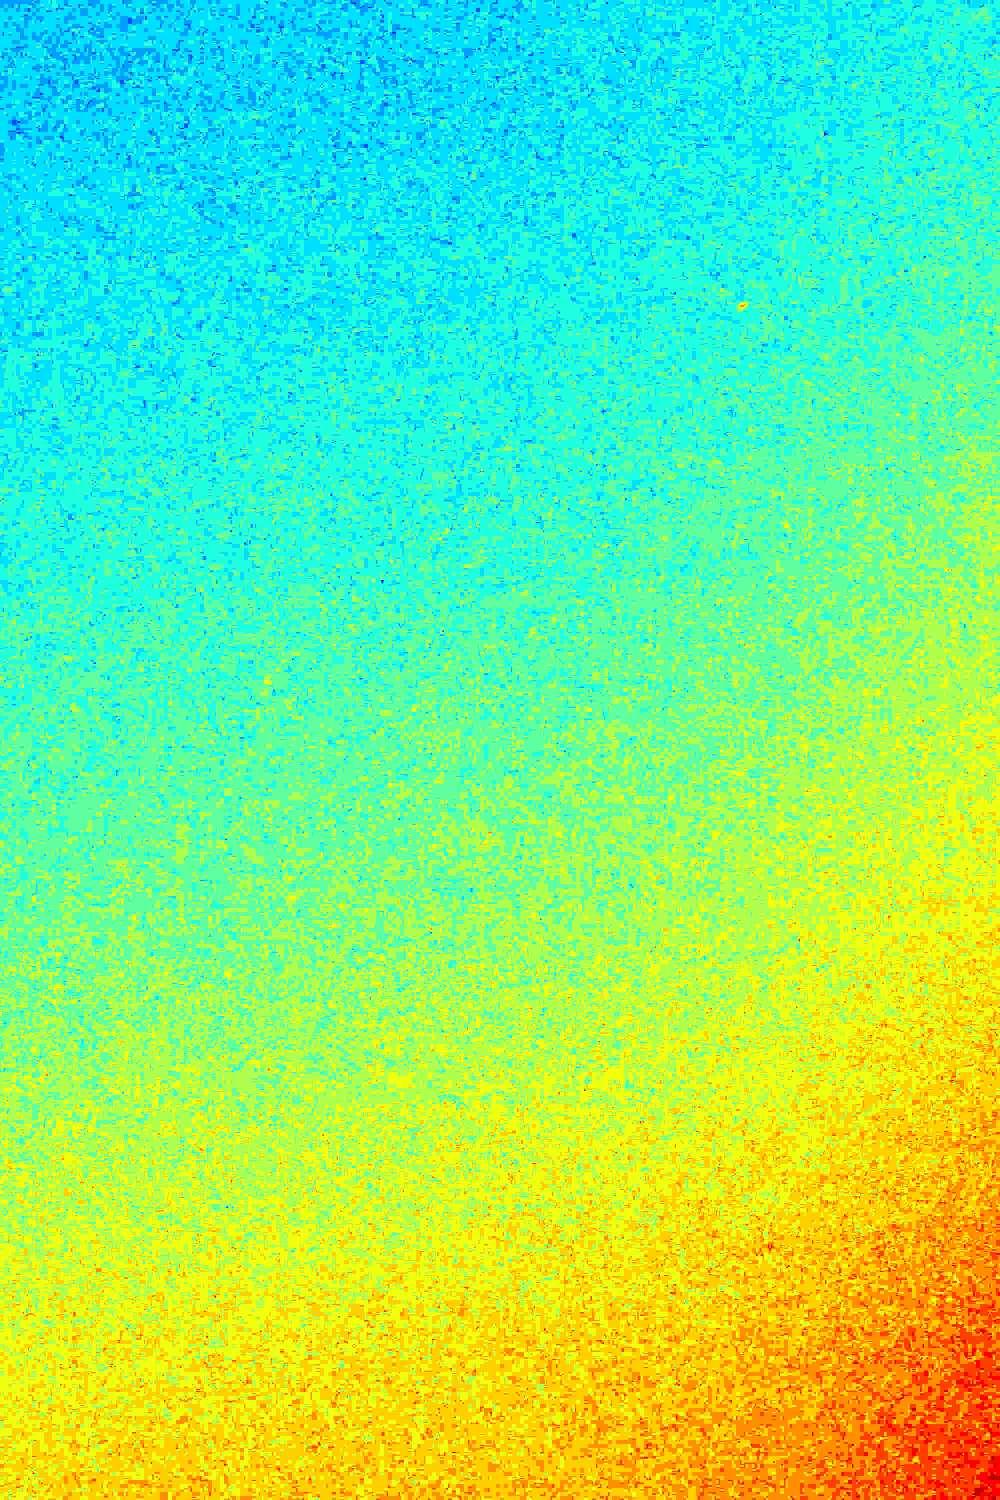 in [7] proposed to perform dithering by adding random noise inside the coding loop after each contour-prone block is reconstructed.